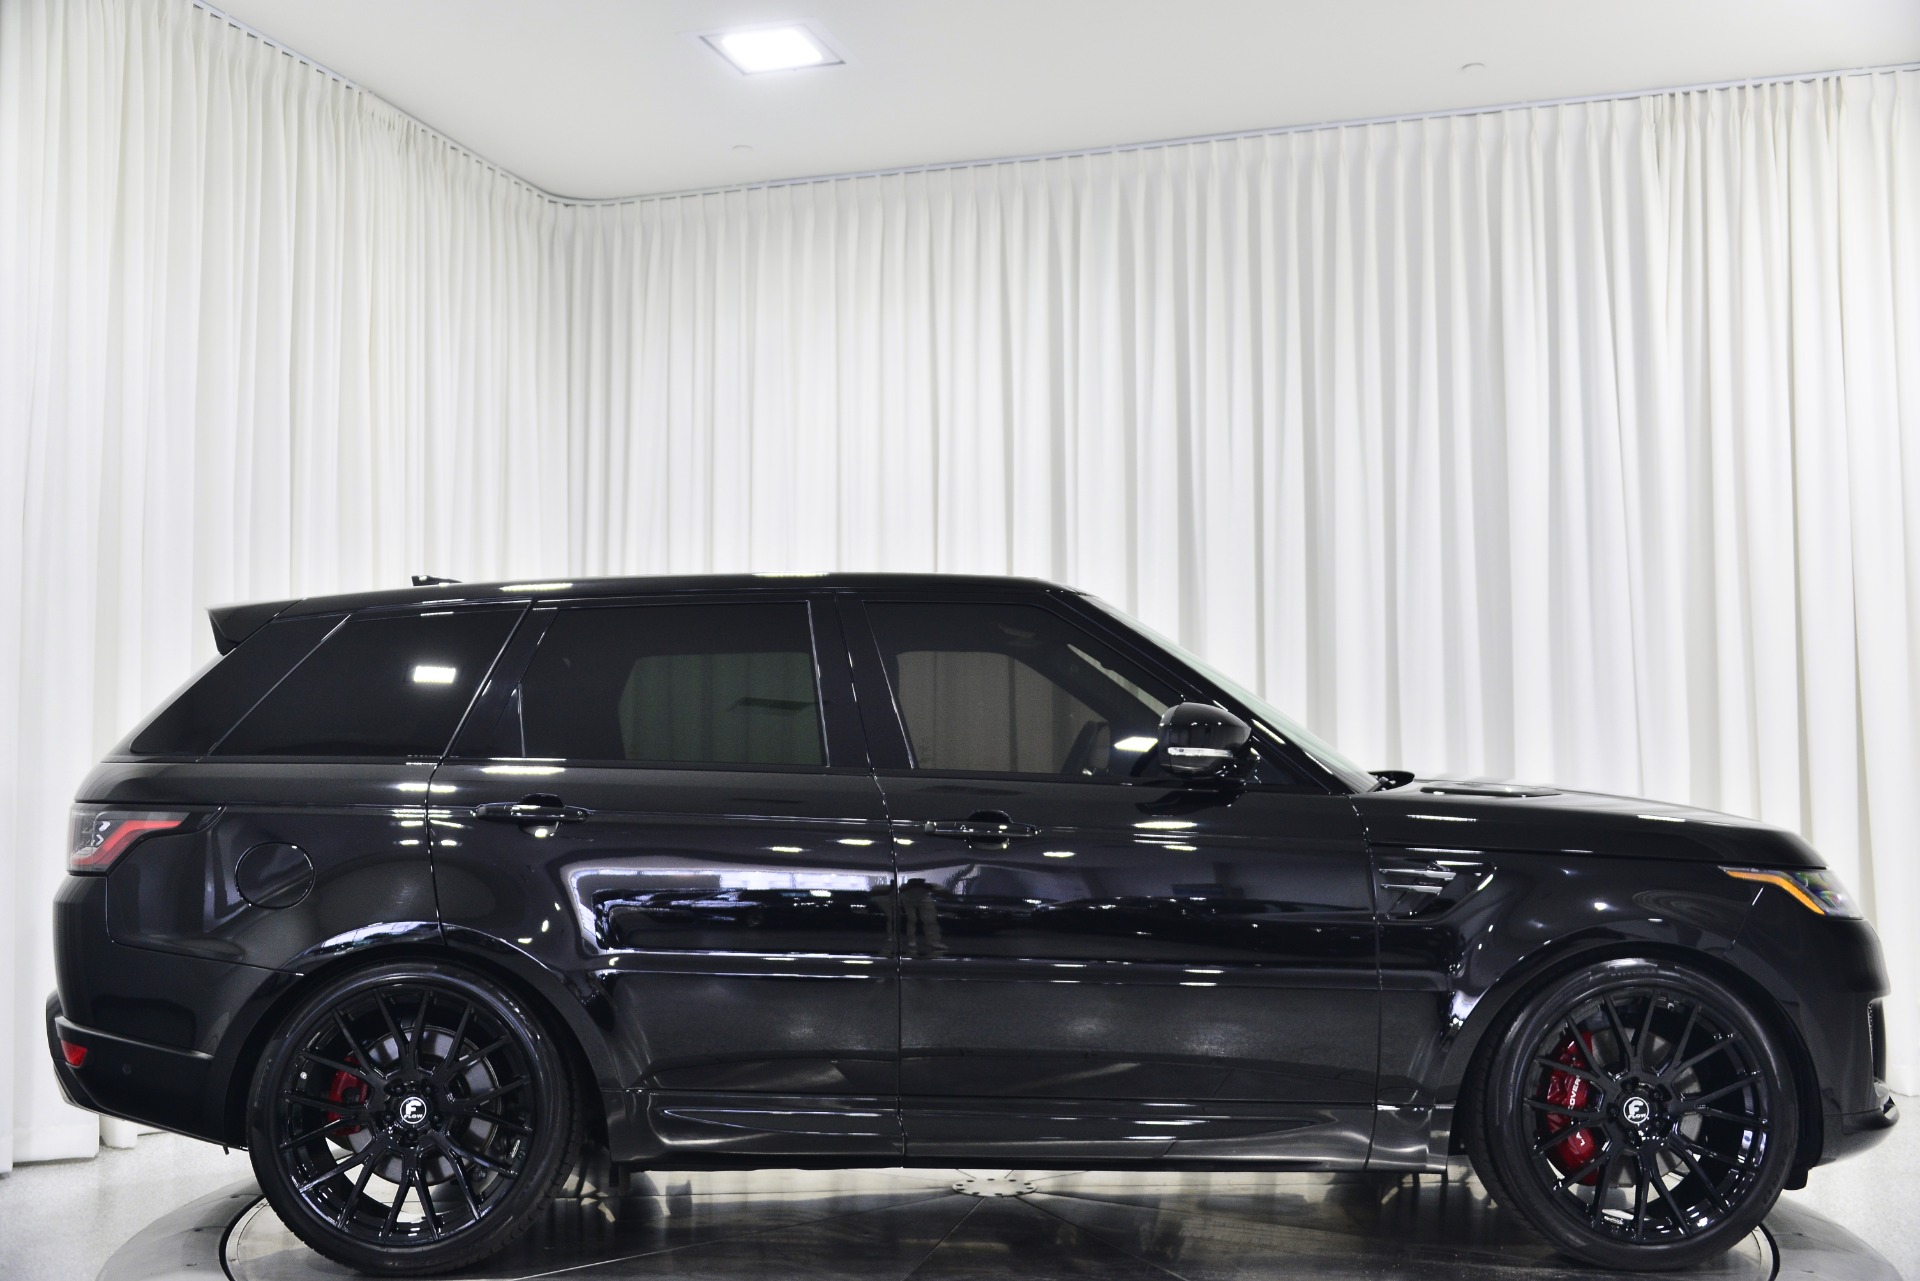 Used 2018 Land Rover Range Rover Sport Supercharged For Sale | Marshall Goldman Beverly Hills Stock #BLRBL